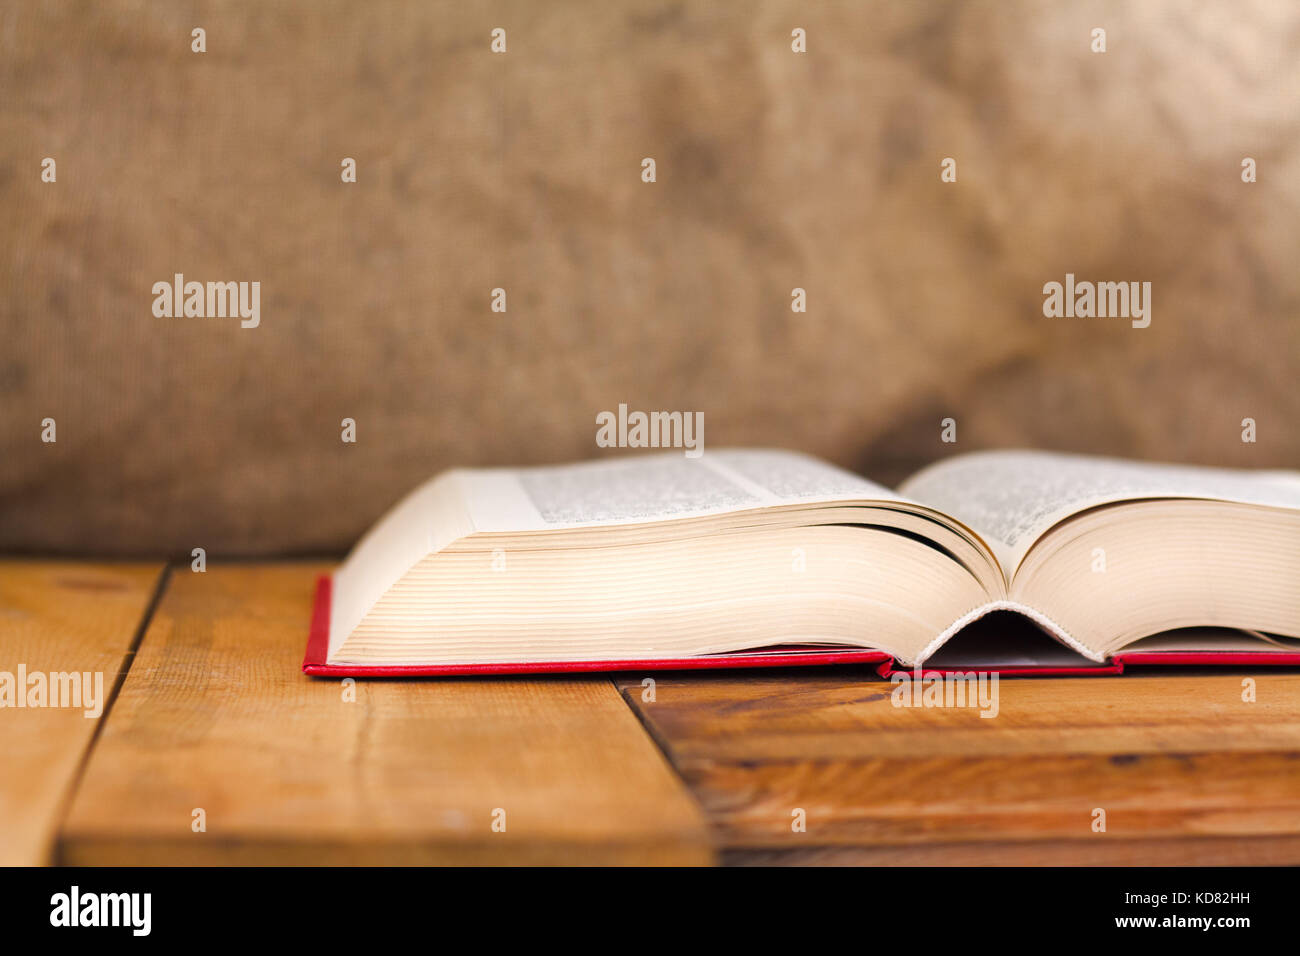 Composition with vintage old hardback books on wooden desk table. Education background. Stock Photo